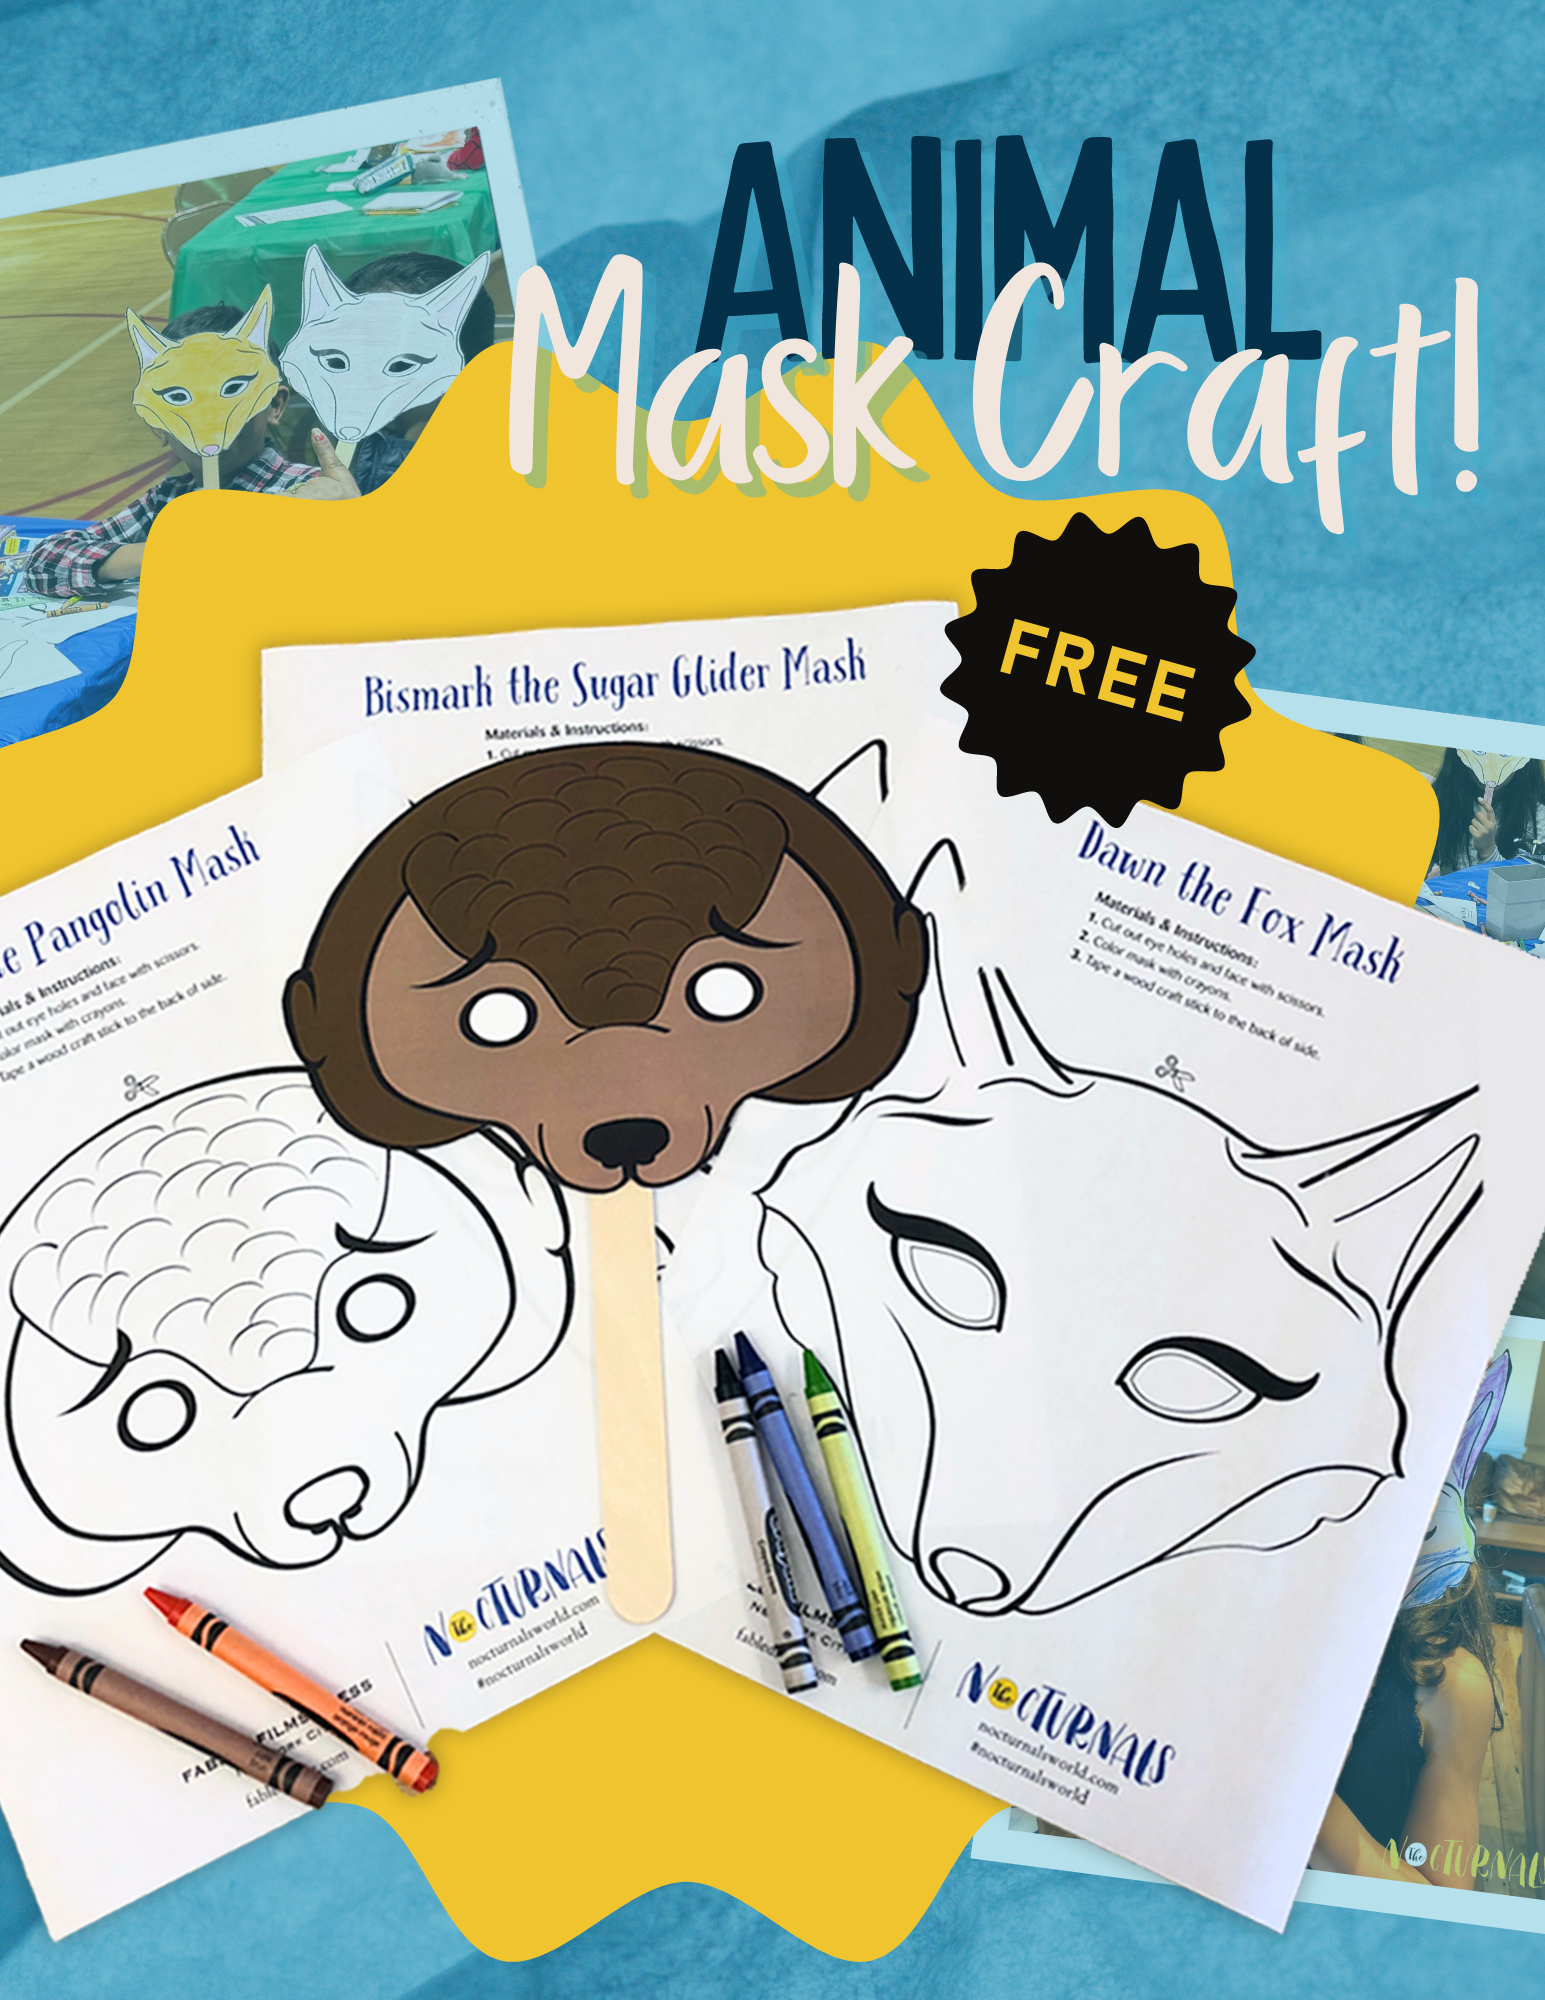 This picture shows the animal mask craft activity where kids can color in character masks and tape a stick to the back to hold the mask up. Each mask follows a character from The Nocturnals series: Dawn, a fox, Tobin, a pangolin, and Bismark, a sugar glider. 